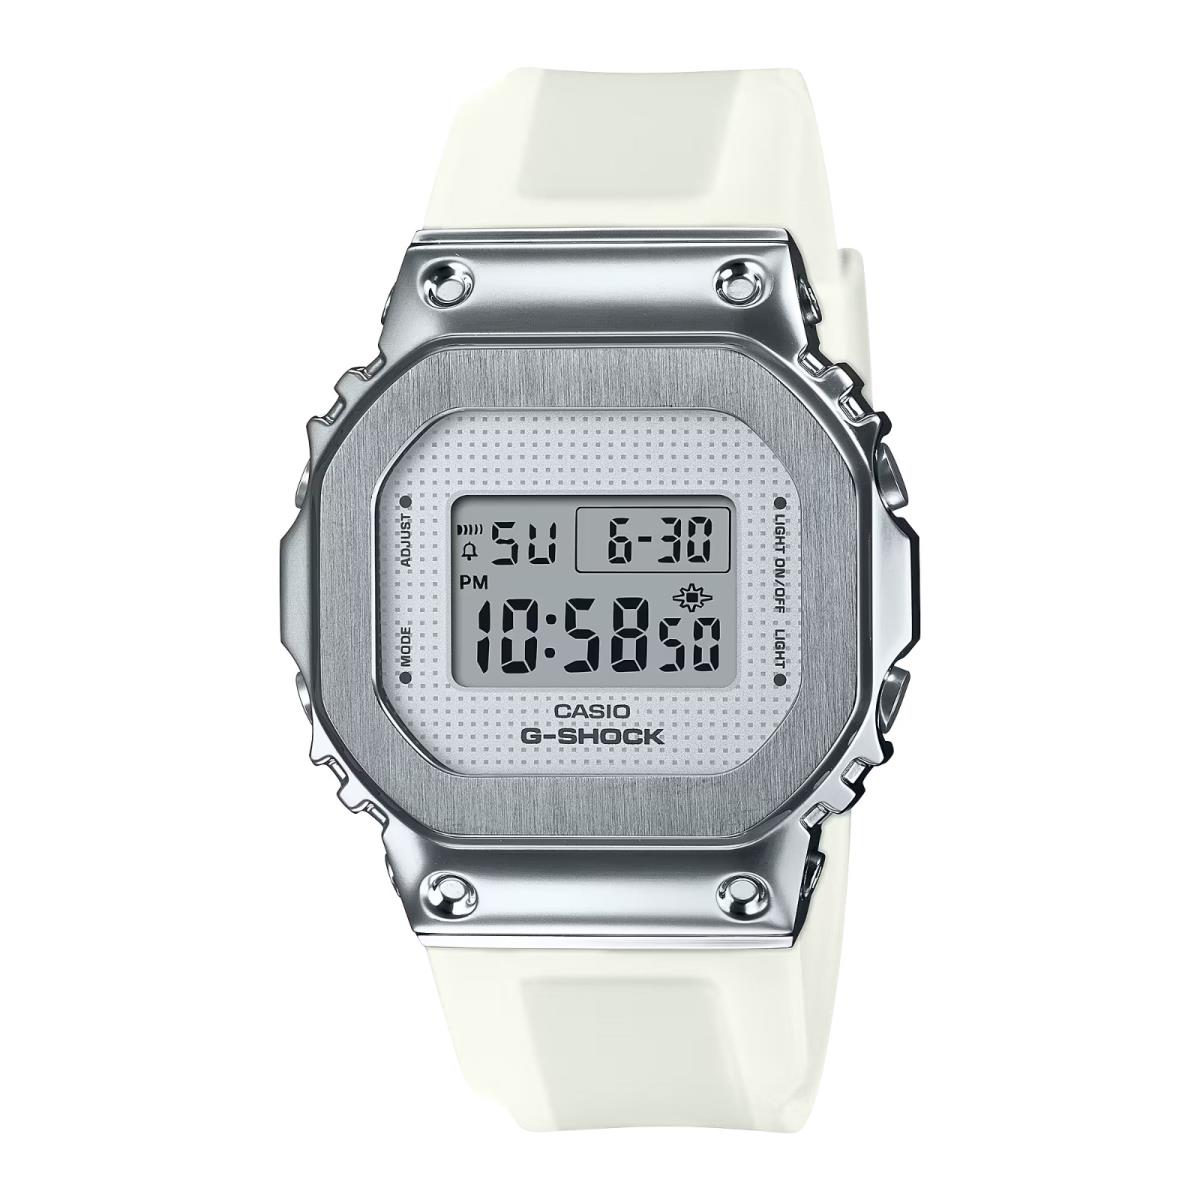 Casio G-shock Womens White Resin Band Watch GMS5600SK-7